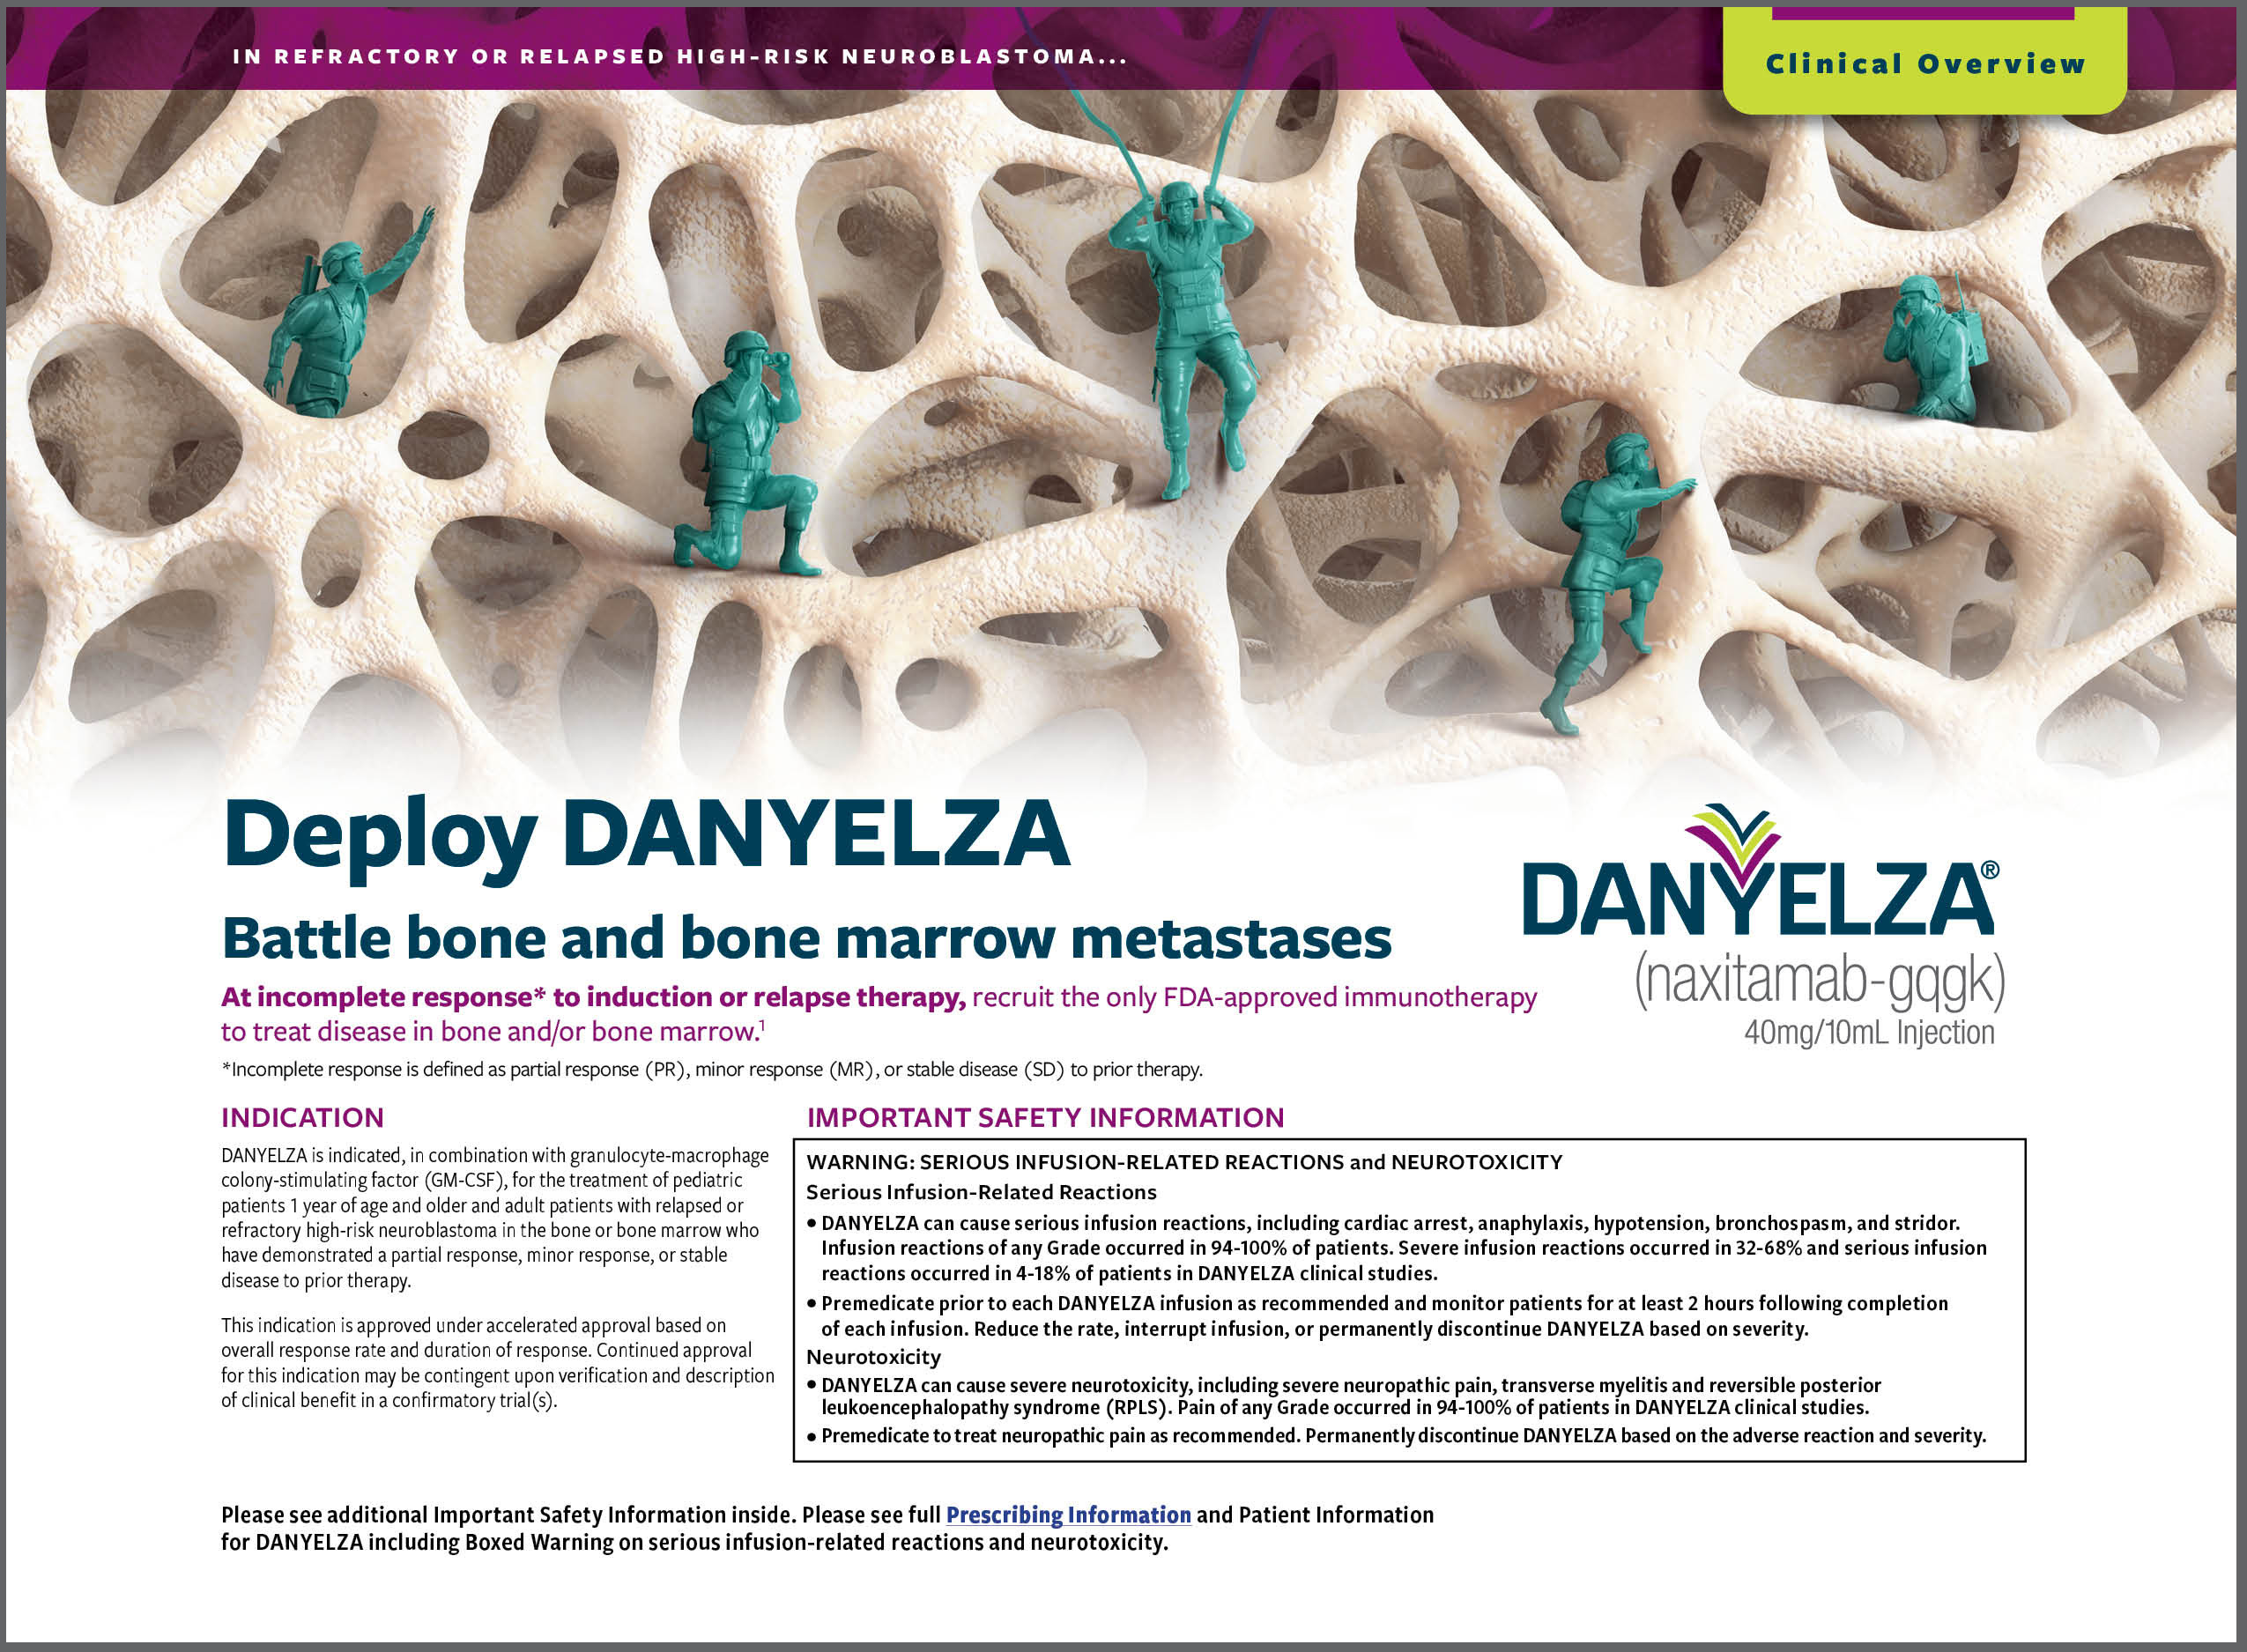 Download the DANYELZA Clinical Overview.